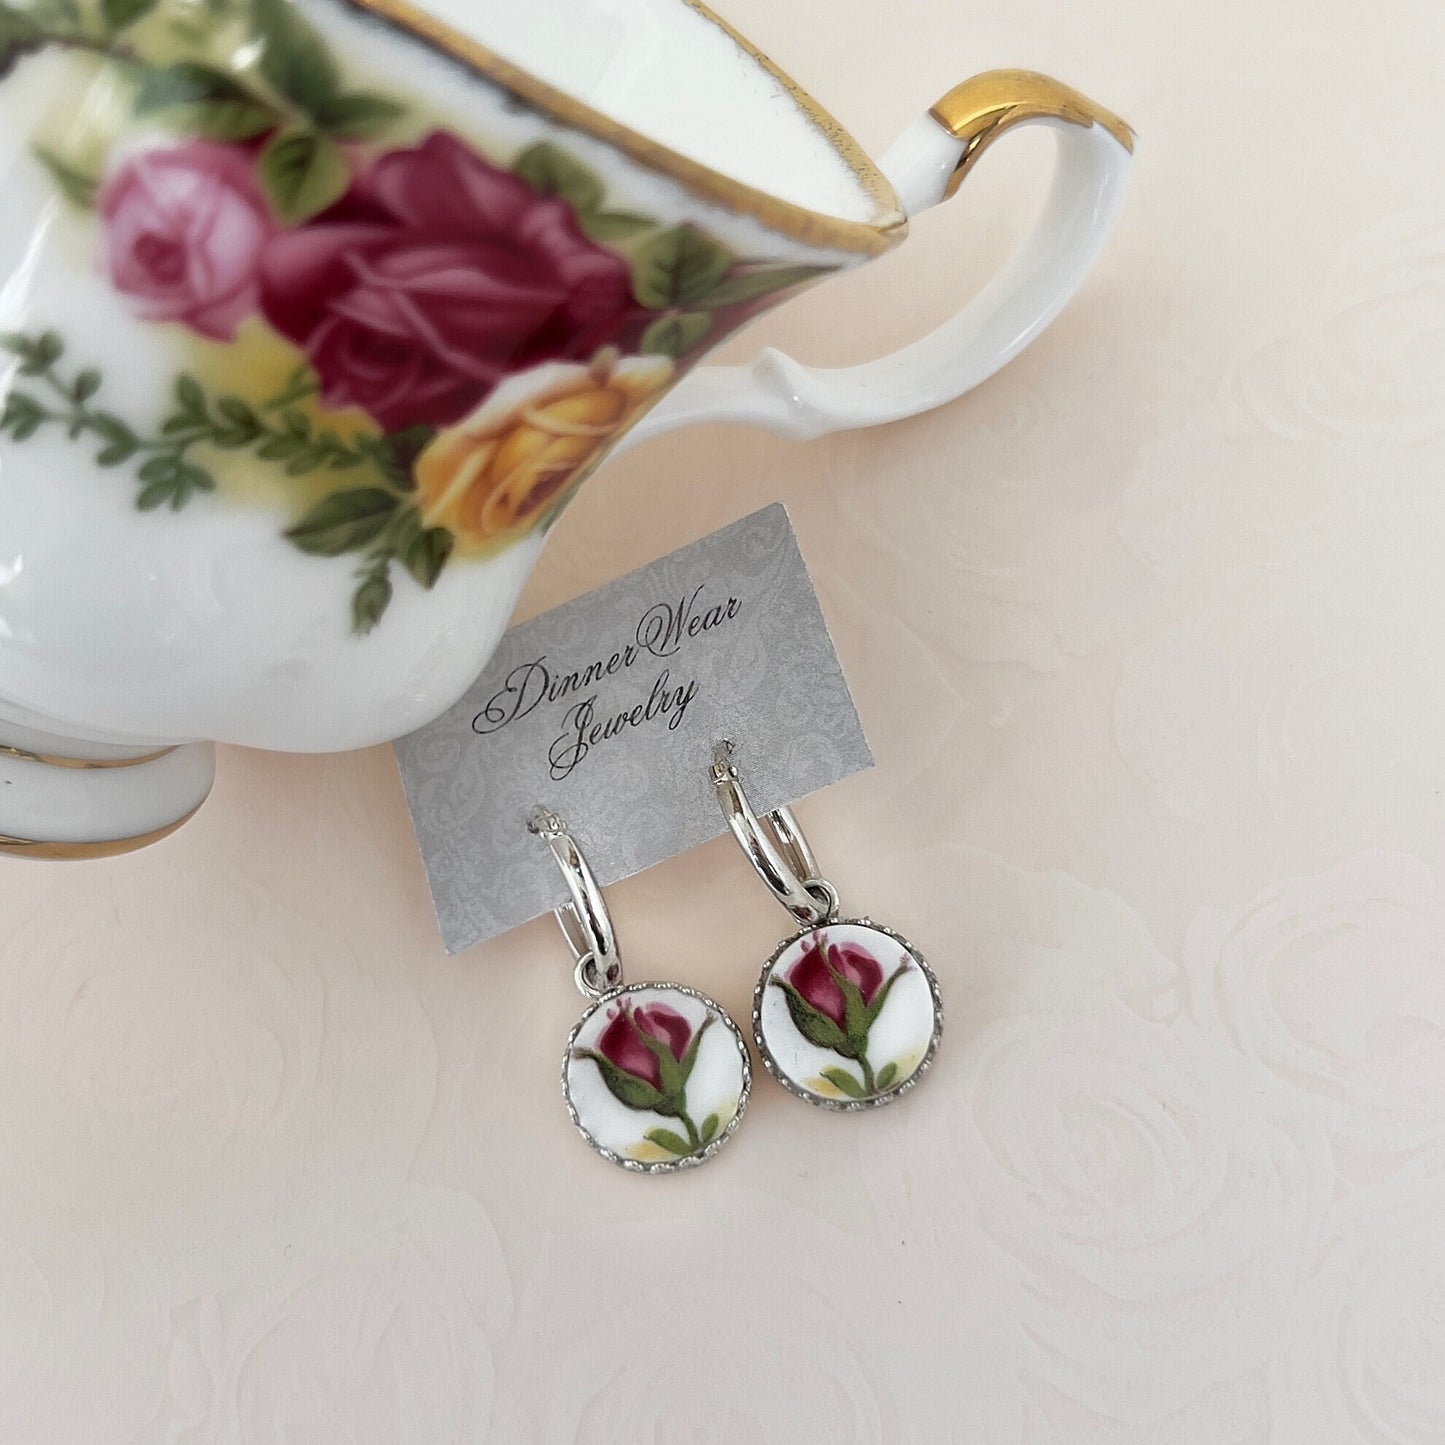 Romantic Rose Earrings, 20th Anniversary Gift for Wife, Broken China Jewelry, Sterling Silver, Royal Albert Old Country Roses